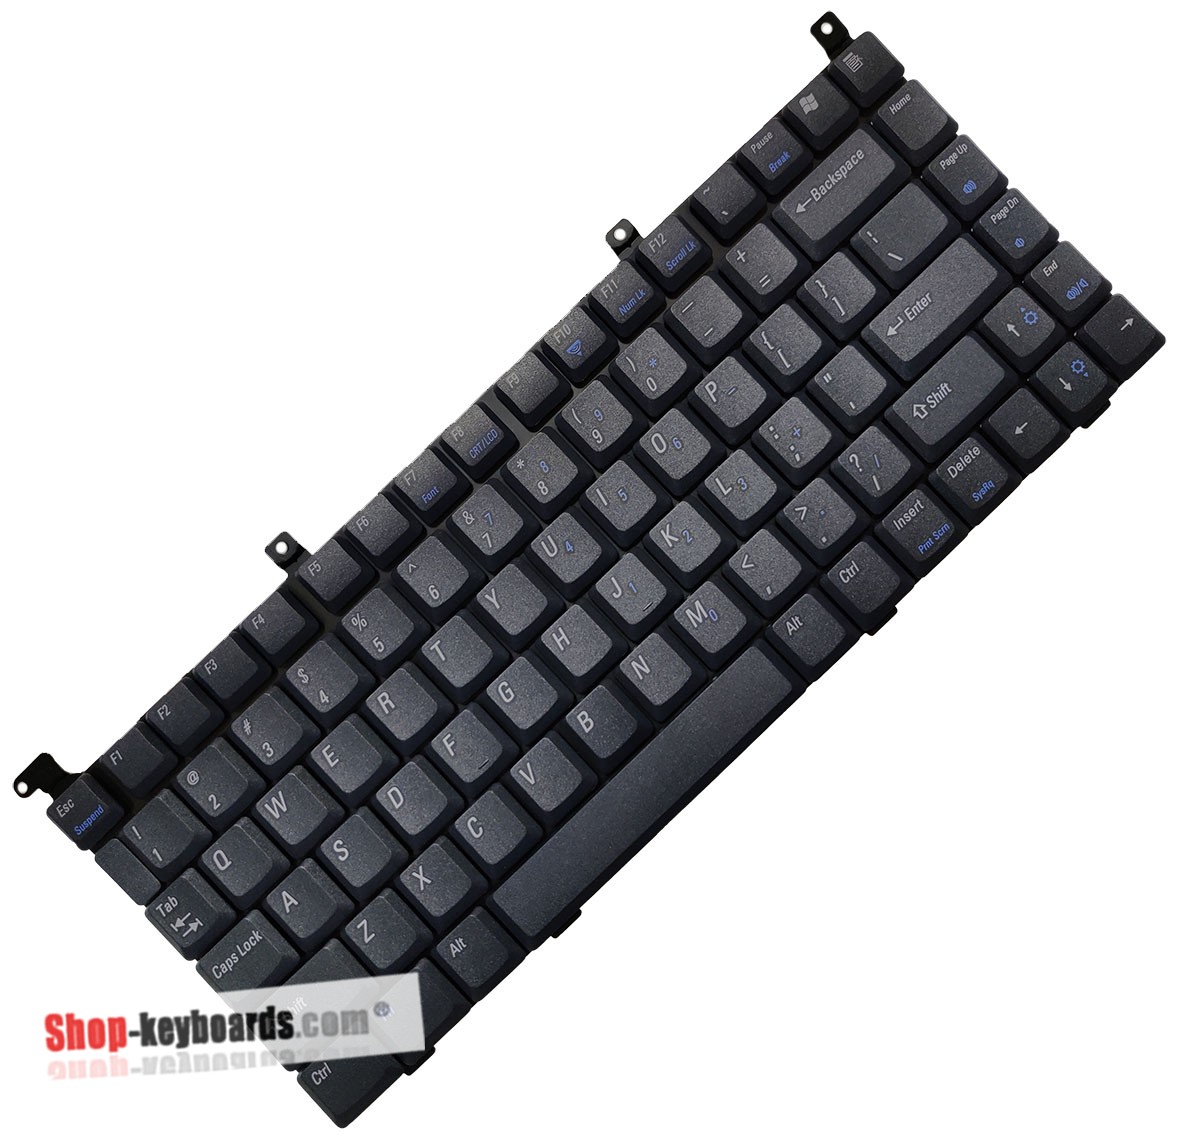 Dell Inspiron 5150 Keyboard replacement